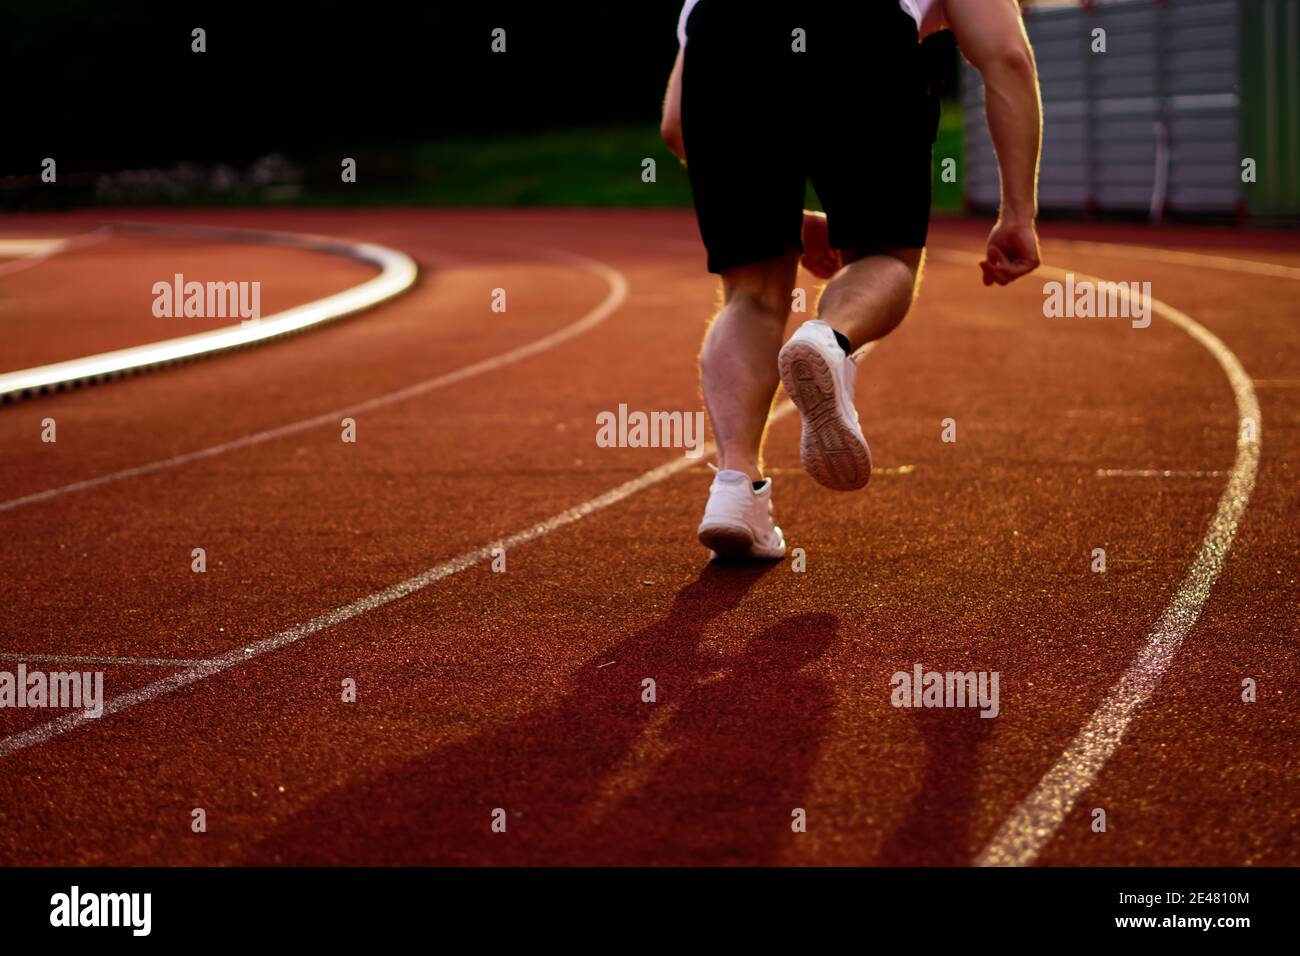 athlete is sprinting over the running track Stock Photo